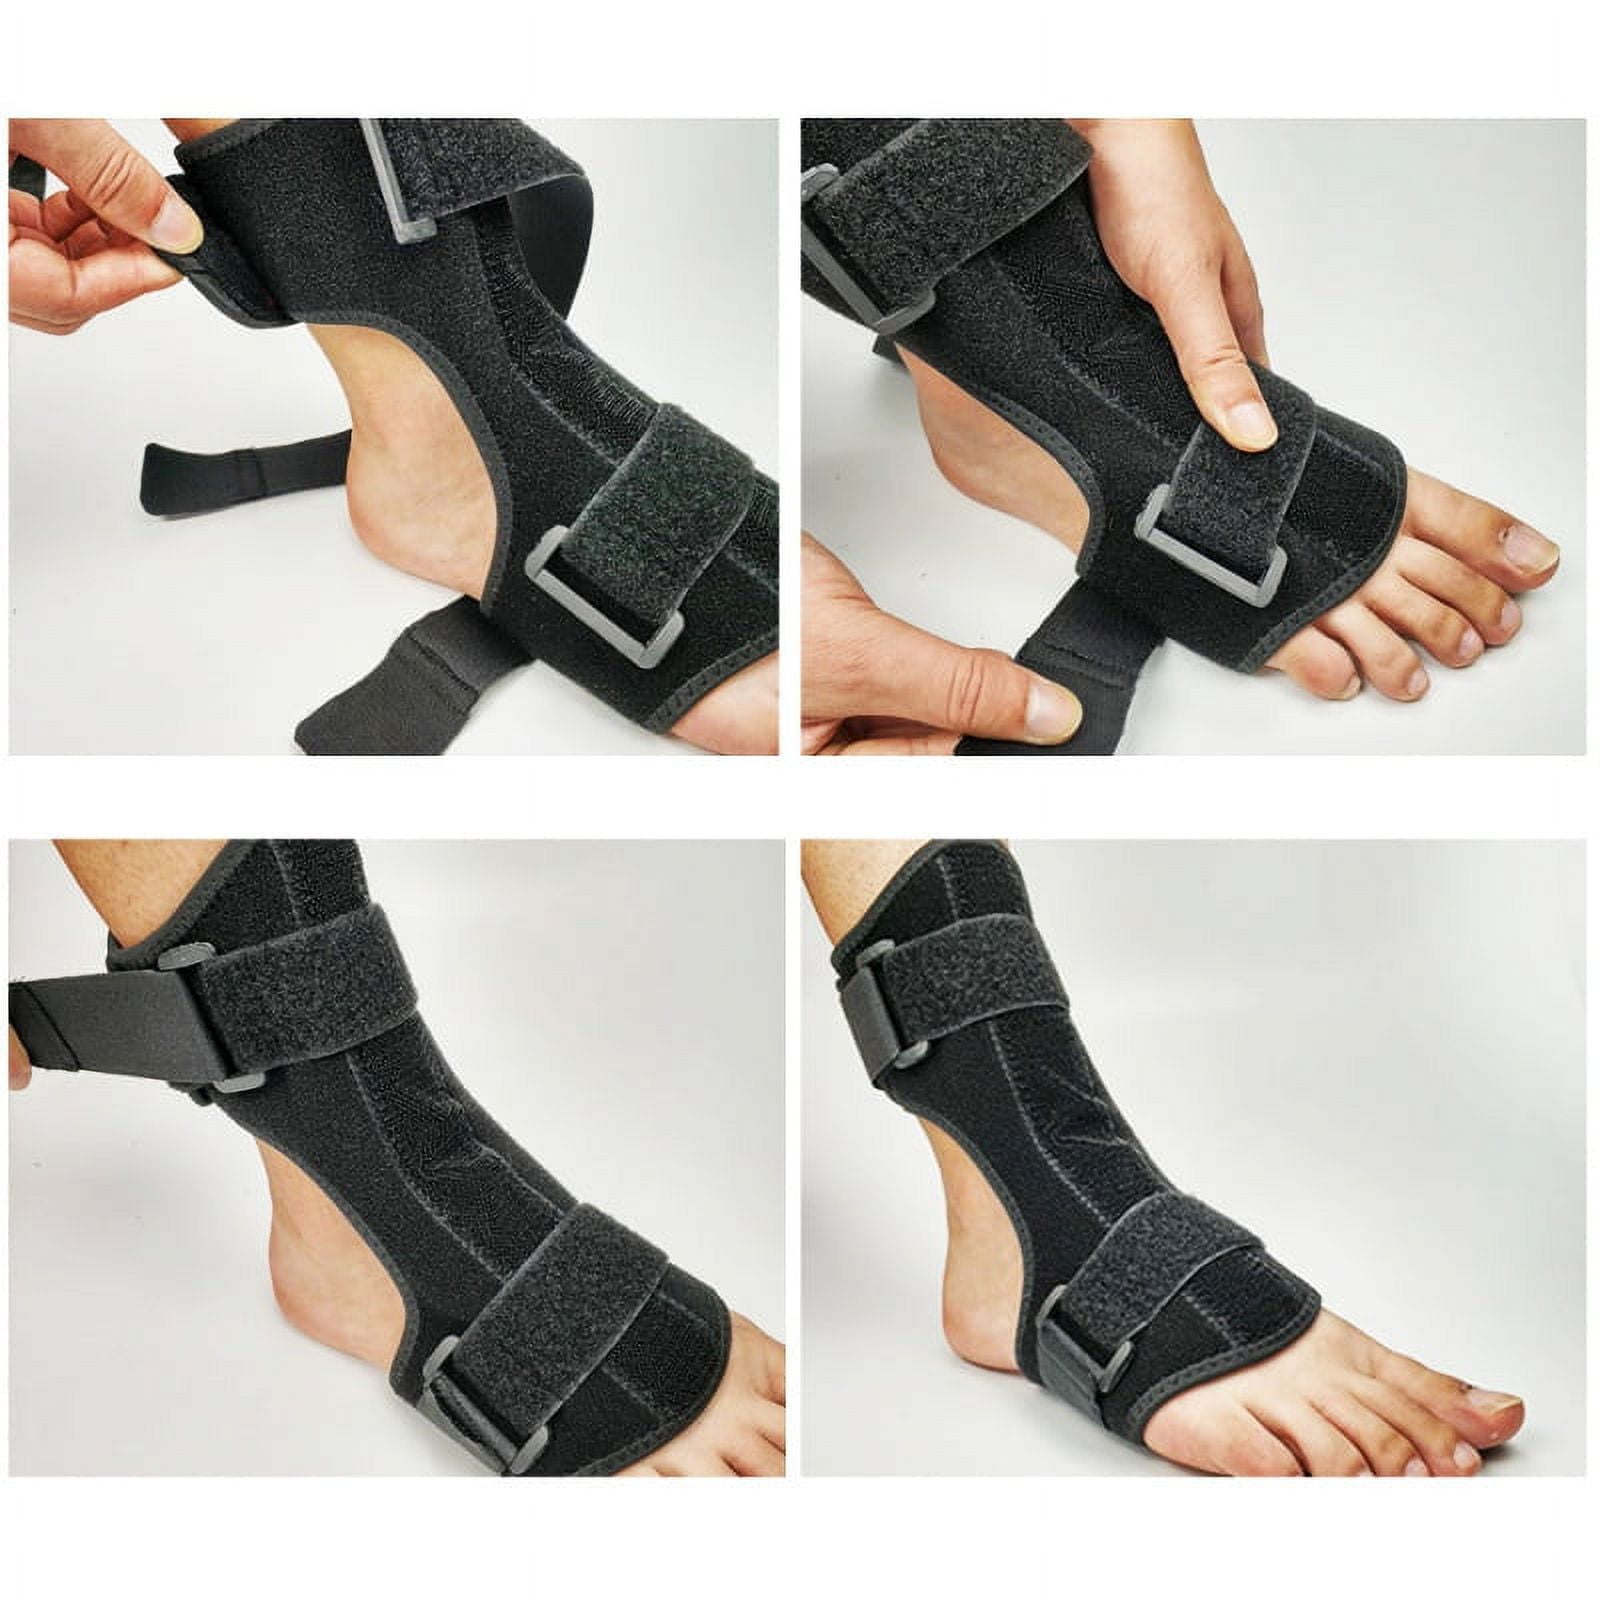 Buy Aider Heel Pad for Plantar Fasciitis Heel Support Brace Relieve Pain  Type 2 (Left) Online at Low Prices in India - Amazon.in